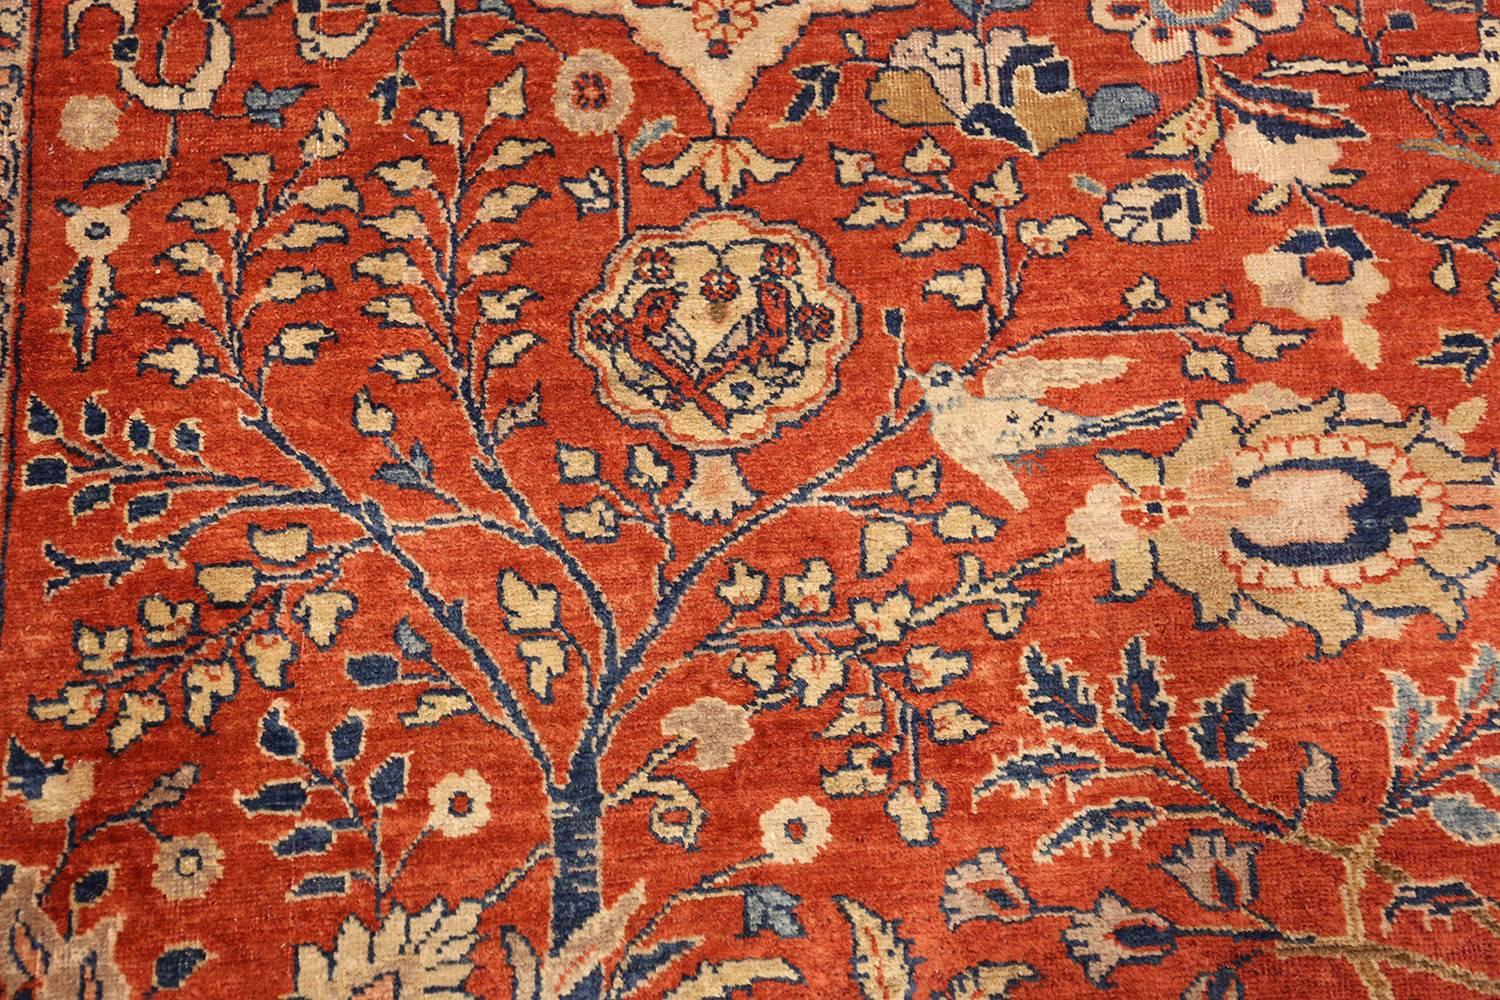 Antique Tabriz rugs are distinguished by their excellent weave and by their remarkable adherence to the classical traditions of antique Persian rug design. But they cannot be distinguished by any particular pattern or by their coloration. The city